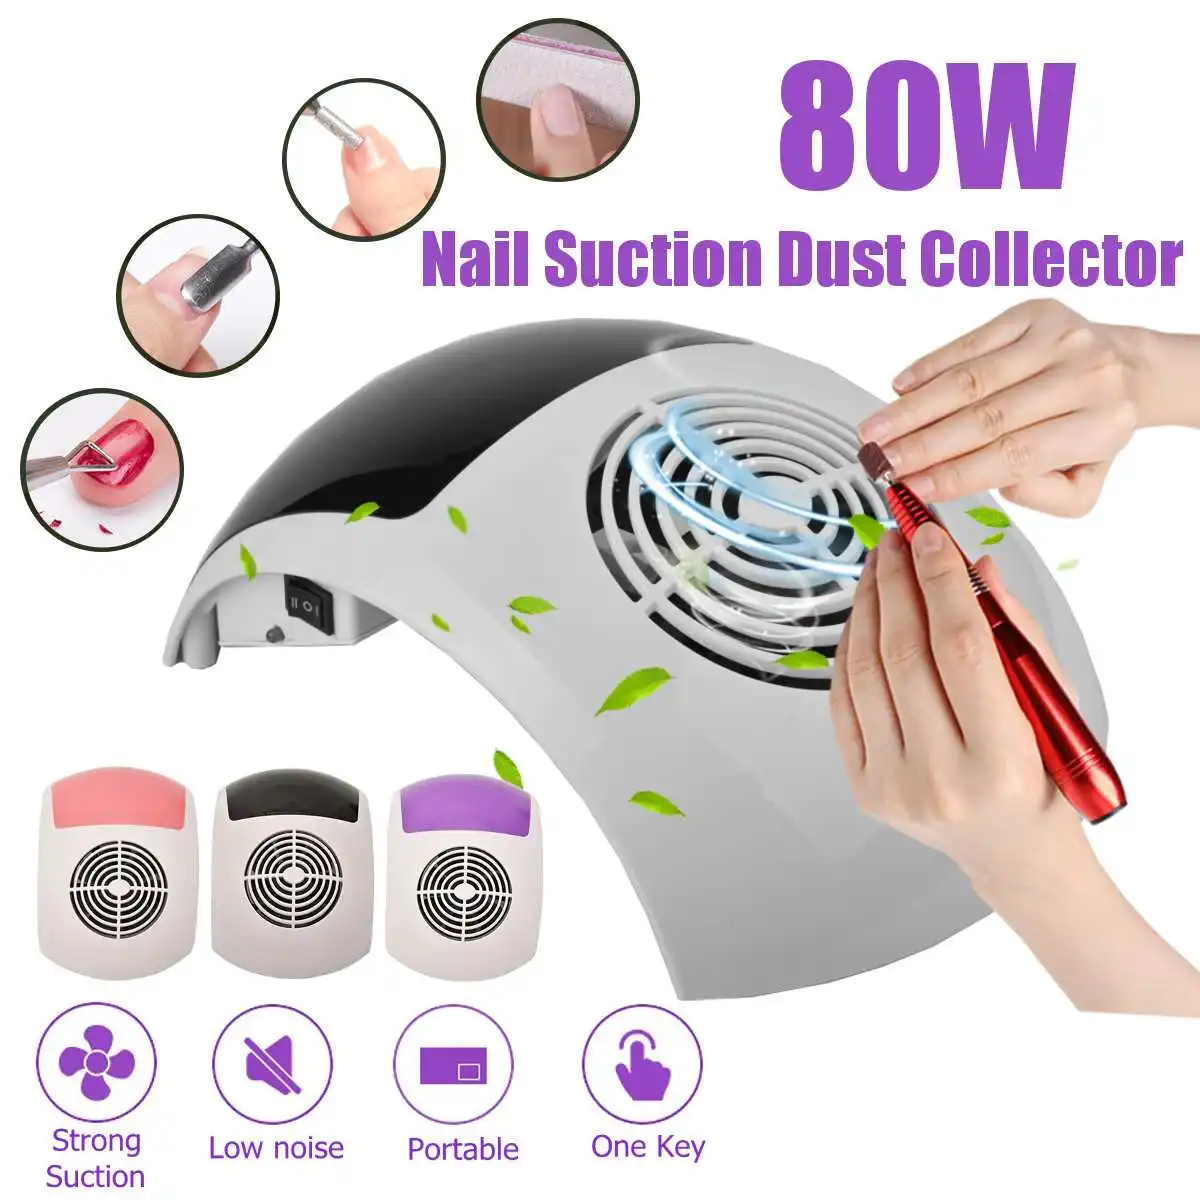 

80W Nail Dust Collector Vacuum Cleaner for Manicures Hood Suction Dust Cleaner Nail Dust Collector Nail Art Manicure Salon Tool